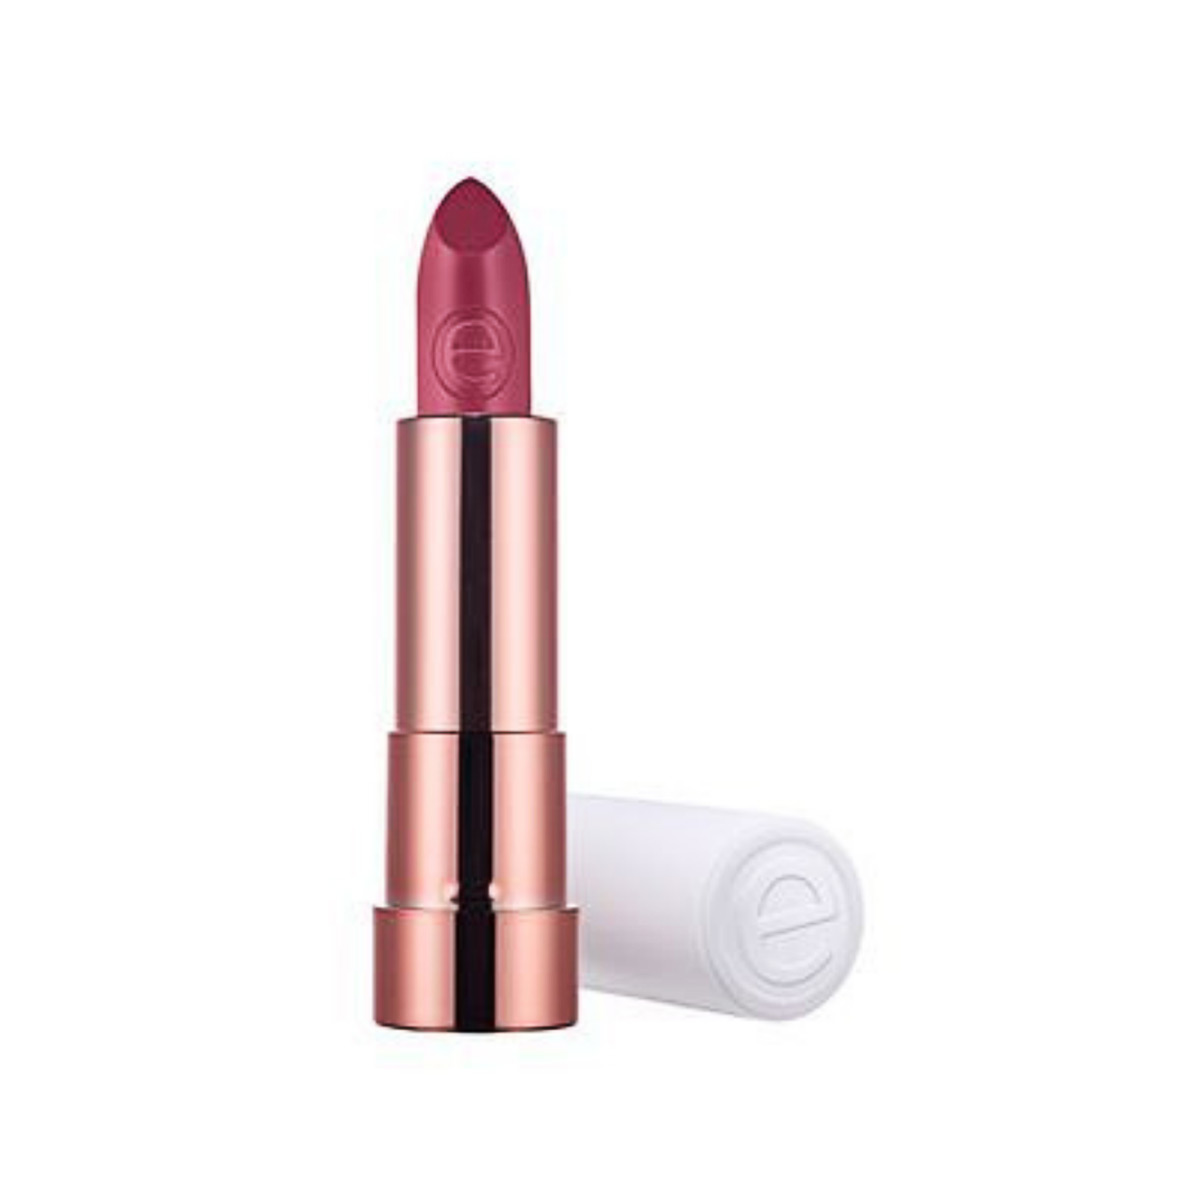 Labial This is me! Semi shine 103 Why not